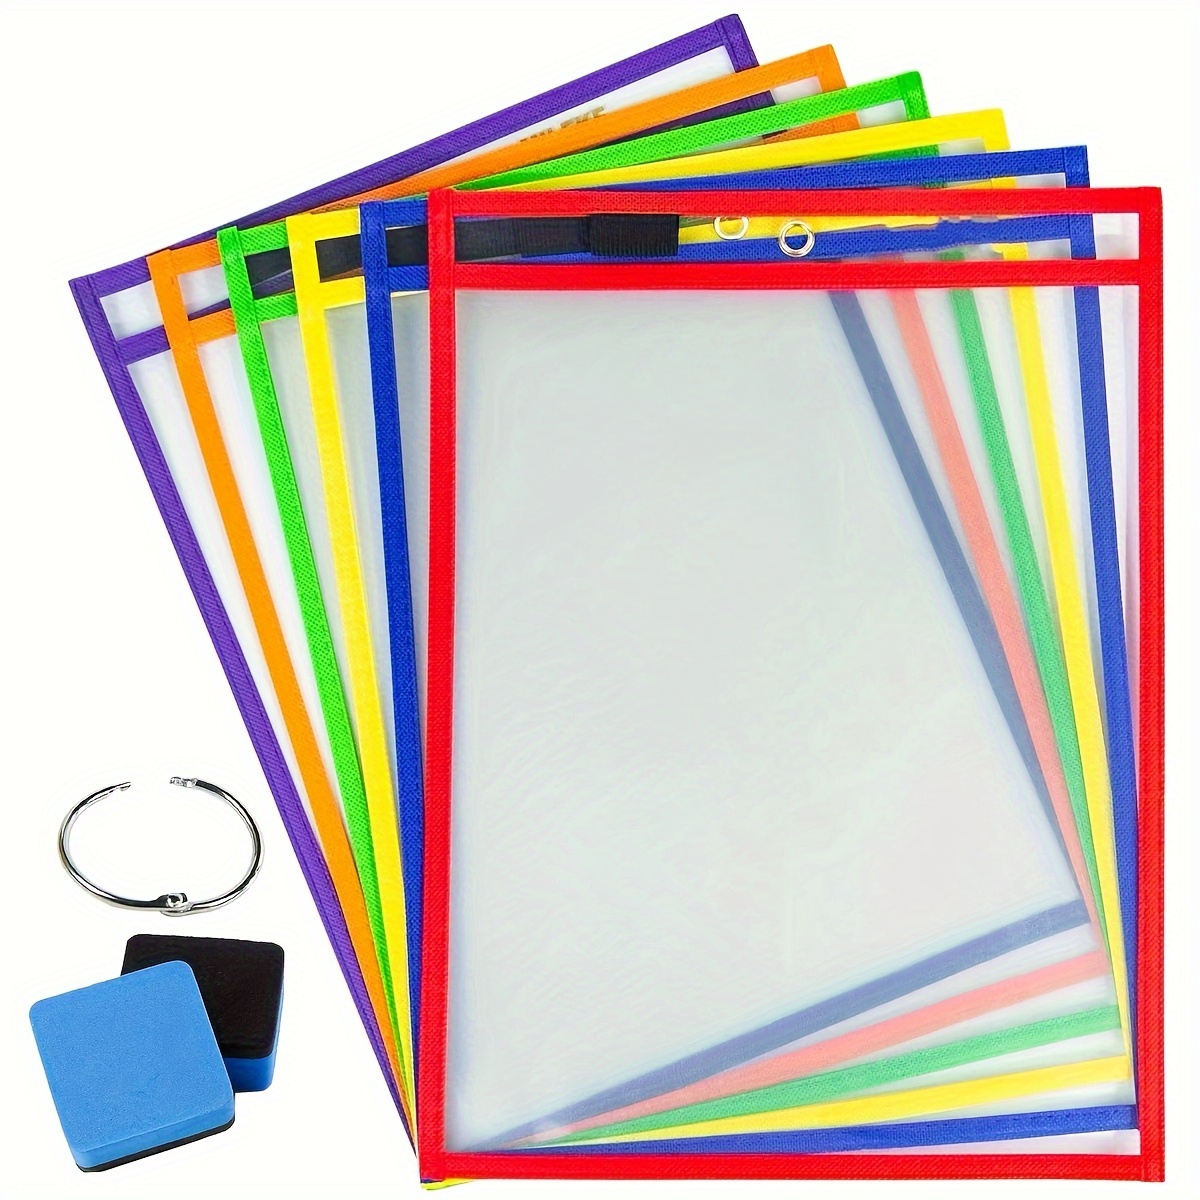 60 Pcs 8.5 x 11 Inches Self Adhesive Shop Ticket Holders Clear Plastic  Sleeves